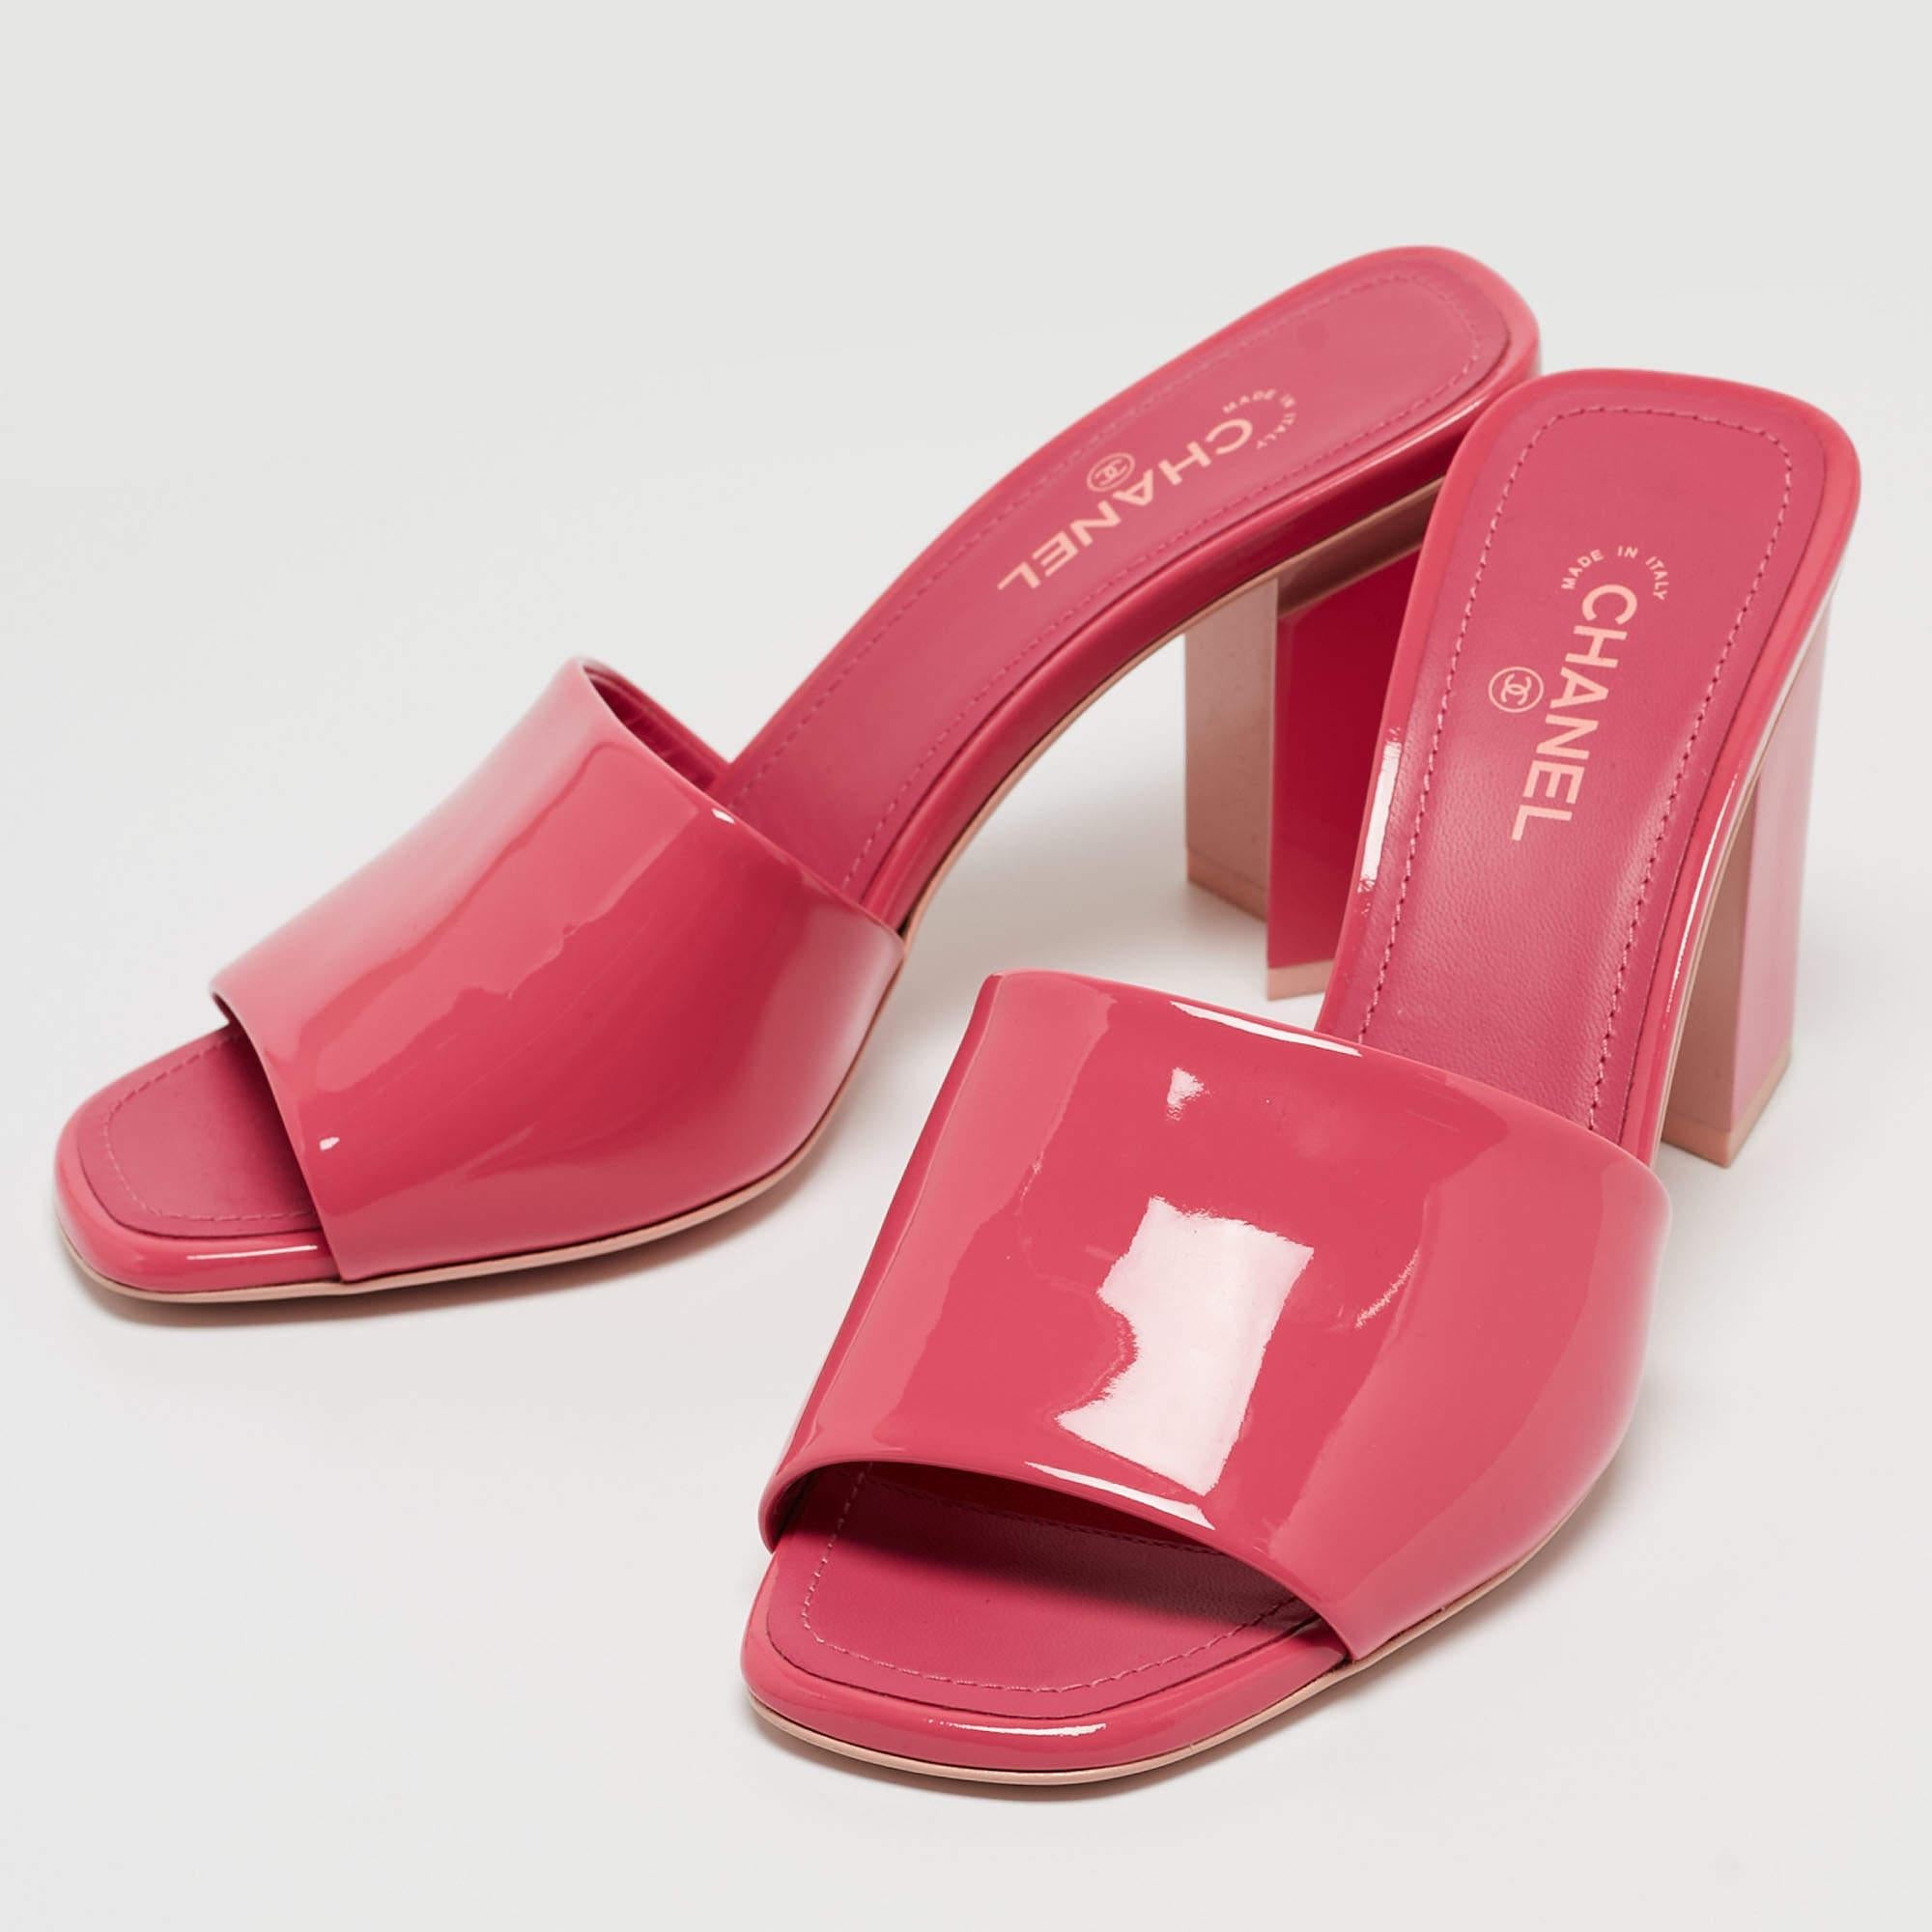 Women's Chanel Pink Patent Leather CC Slide Sandals Size 36